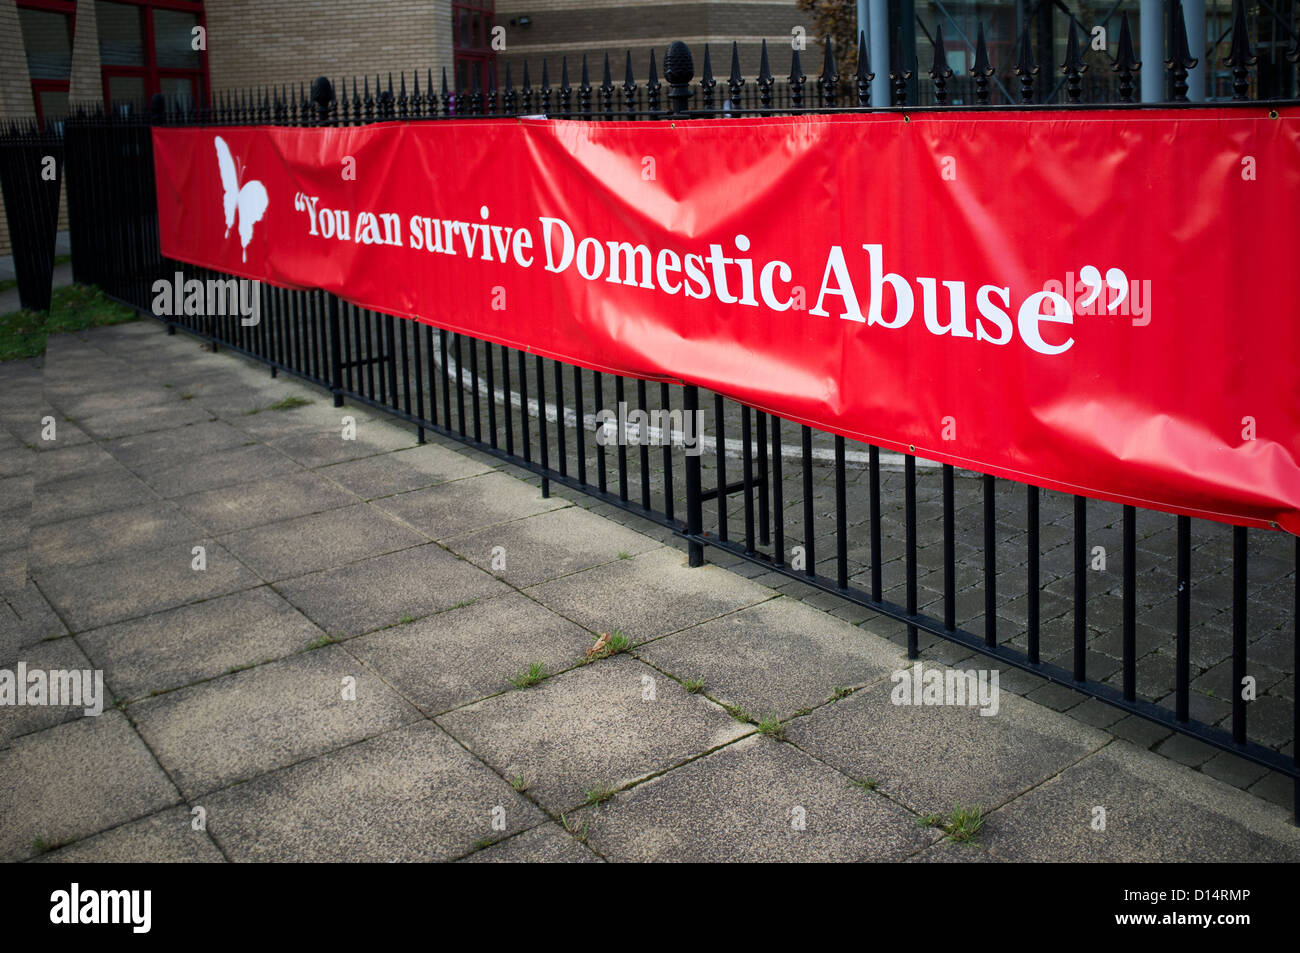 A banner with a quote about domestic abuse Stock Photo